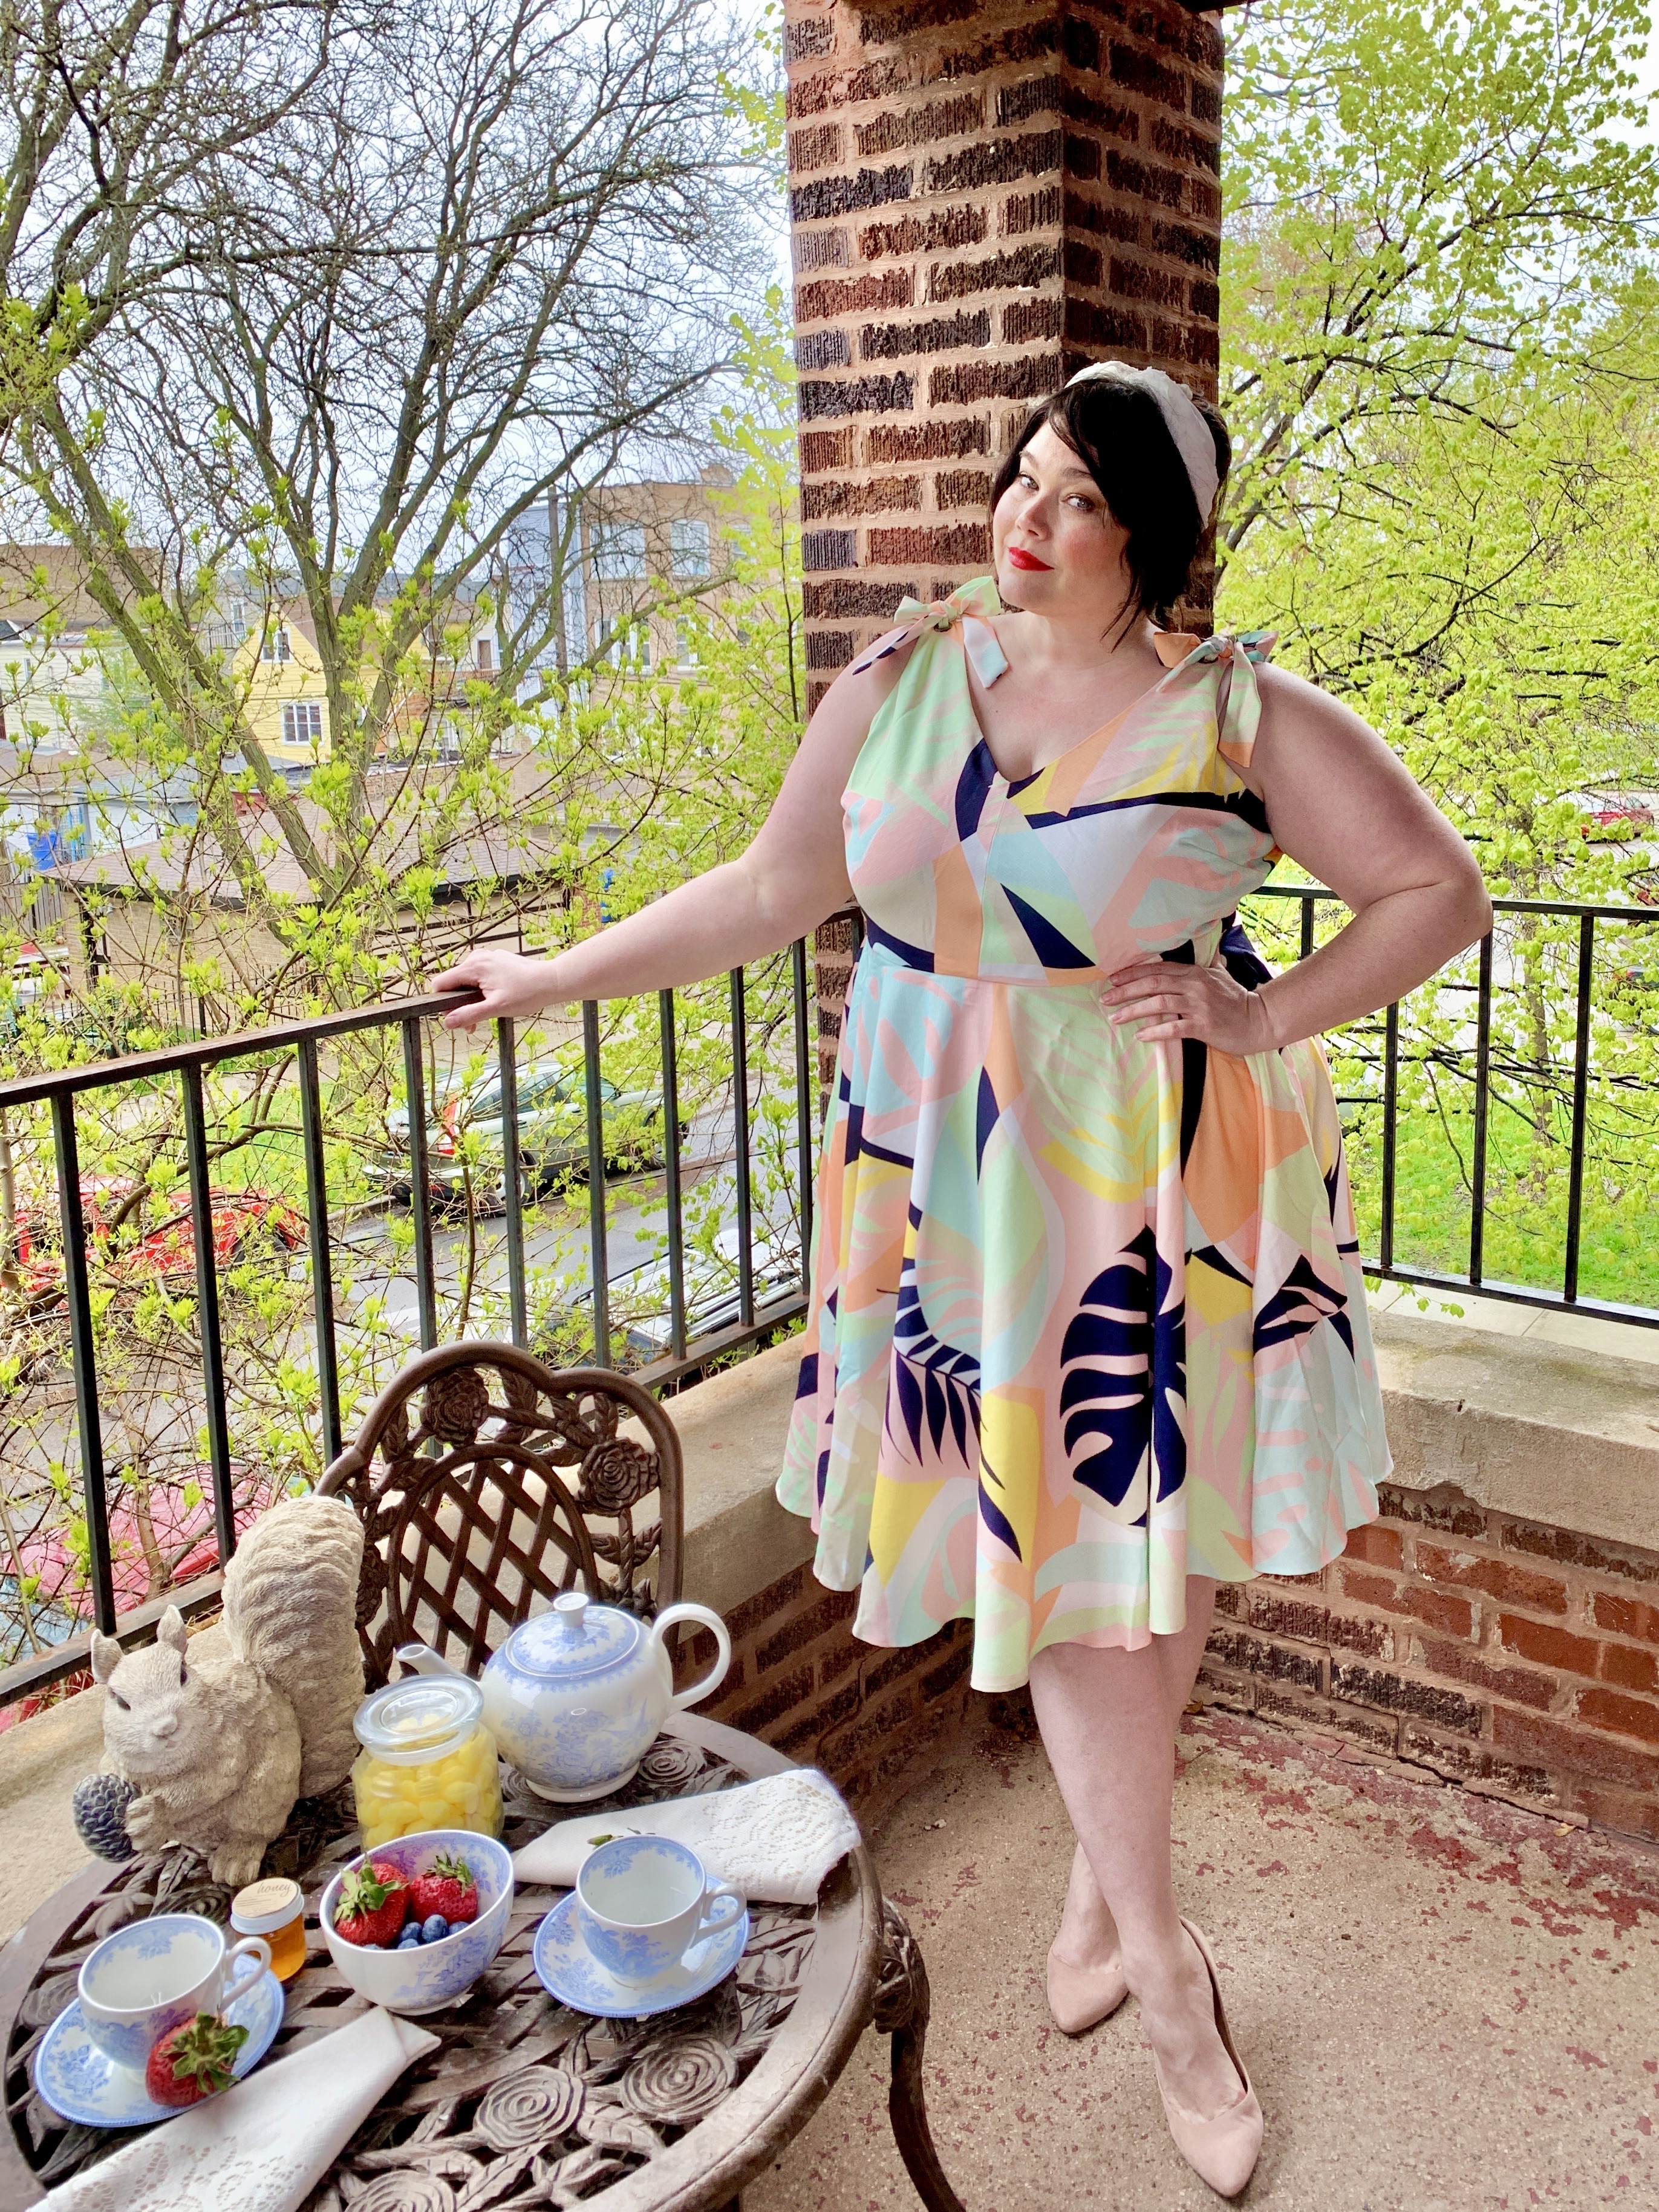 Style Plus Curves A Chicago Plus Size Fashion Blog Page 2 Of 109 Plus Size Fashion And